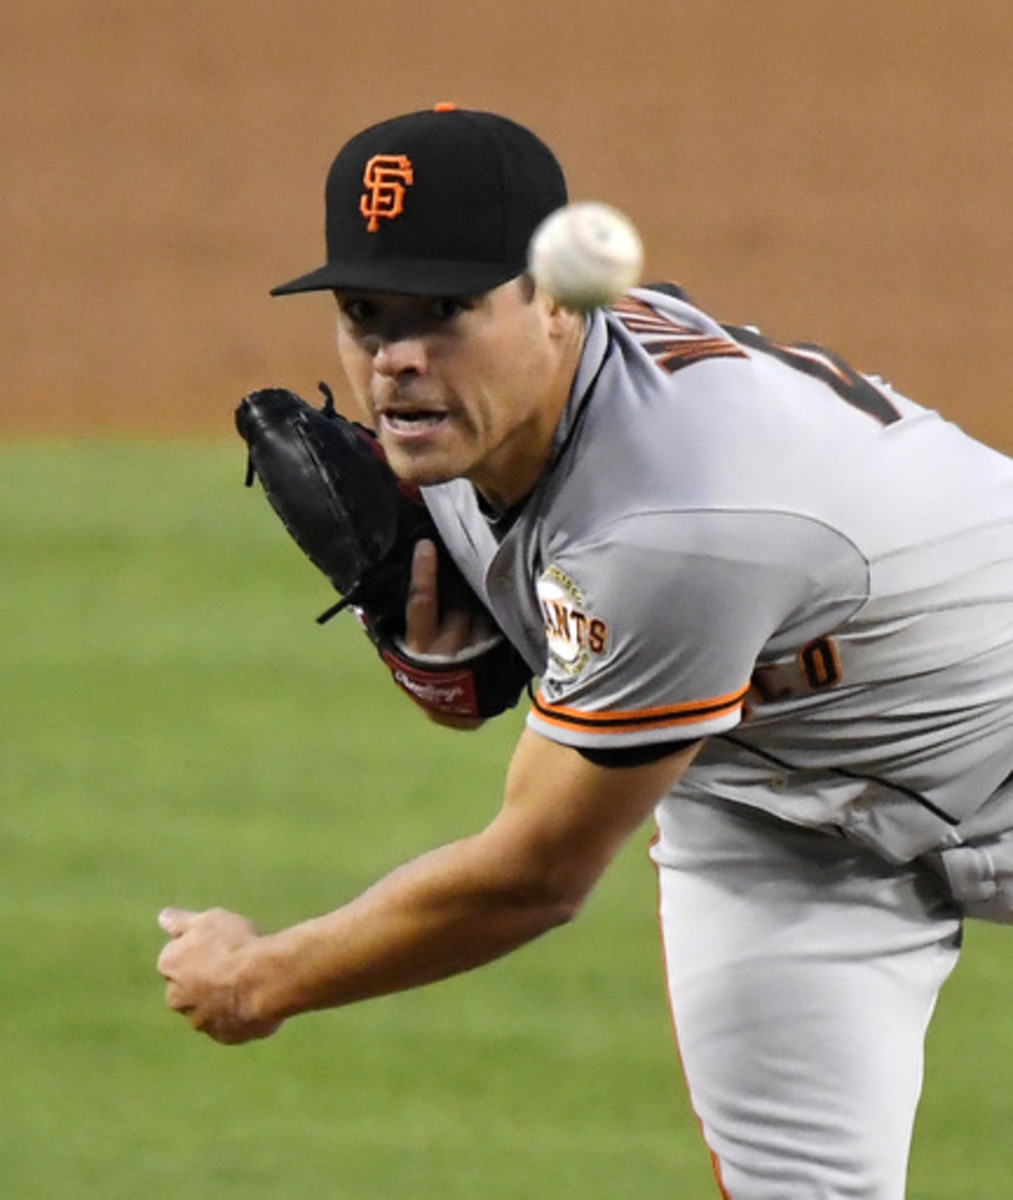 San Francisco Giants starting pitcher Matt Moore throws during the first inning of a baseball game against the Los Angeles Dodgers, Thursday, Aug. 25, 2016, in Los Angeles. (AP Photo/Mark J. Terrill)